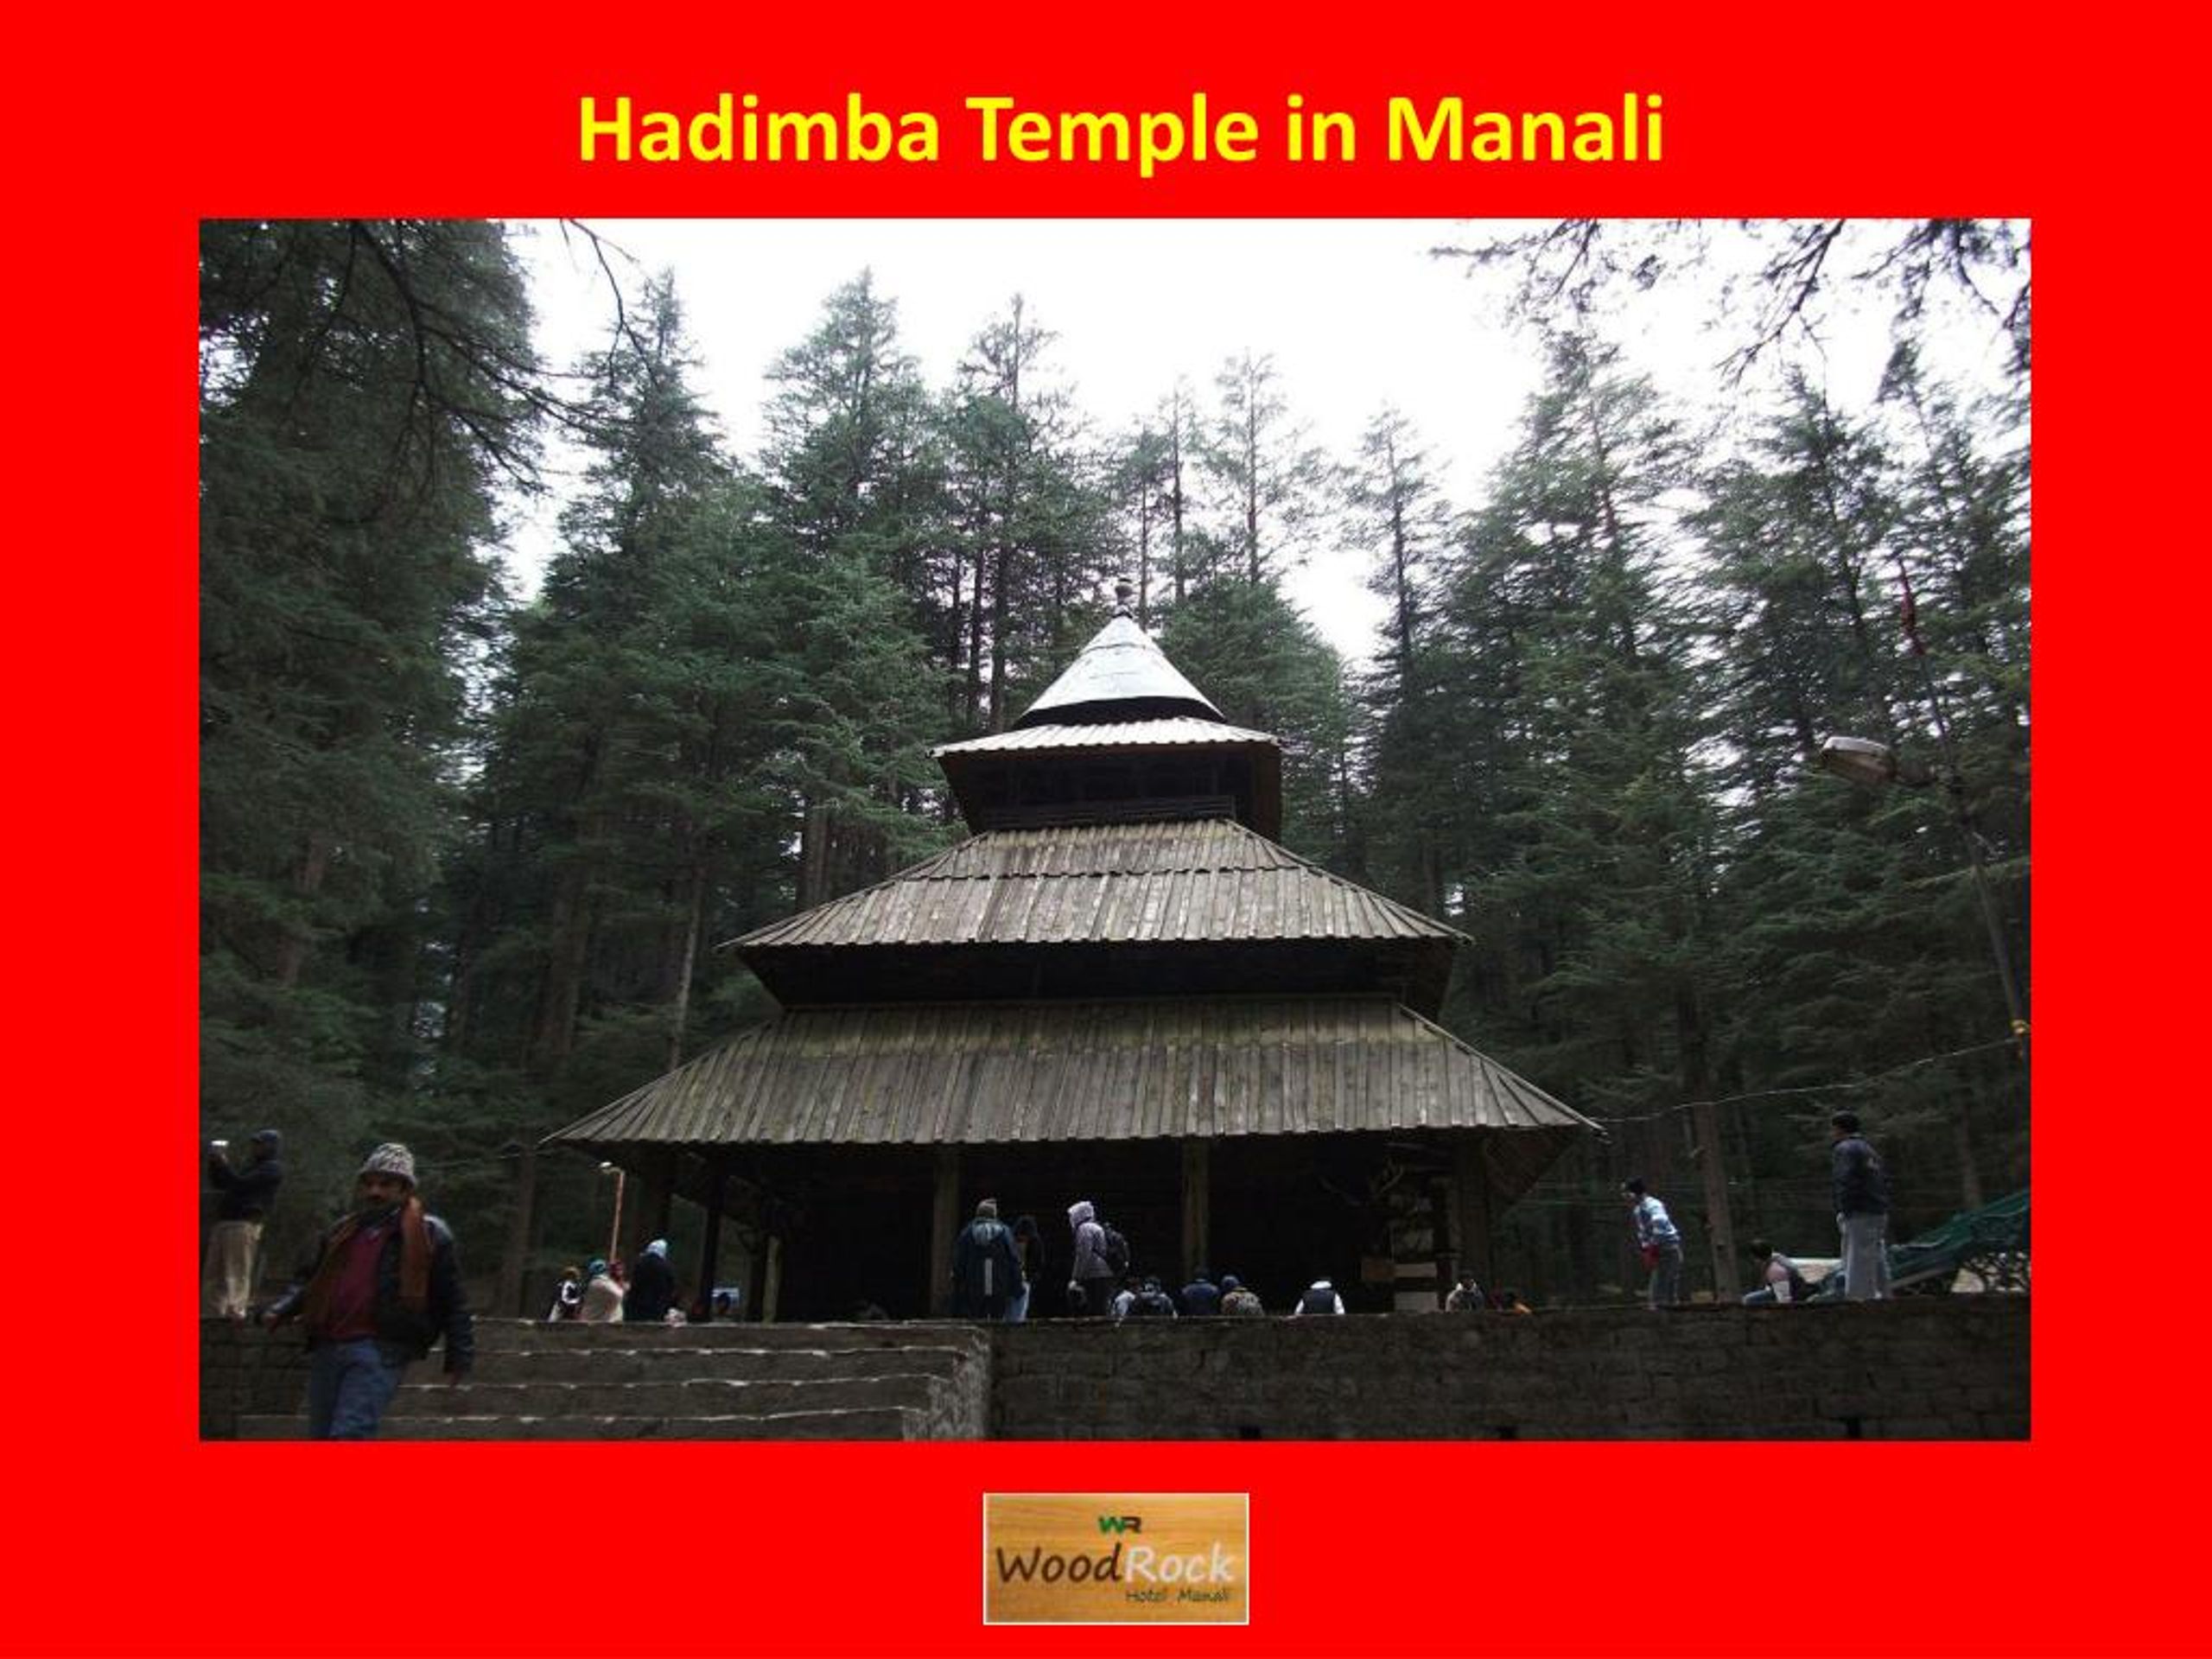 PPT - Manali Attractions - Woodrock Hotel Manali PowerPoint ...